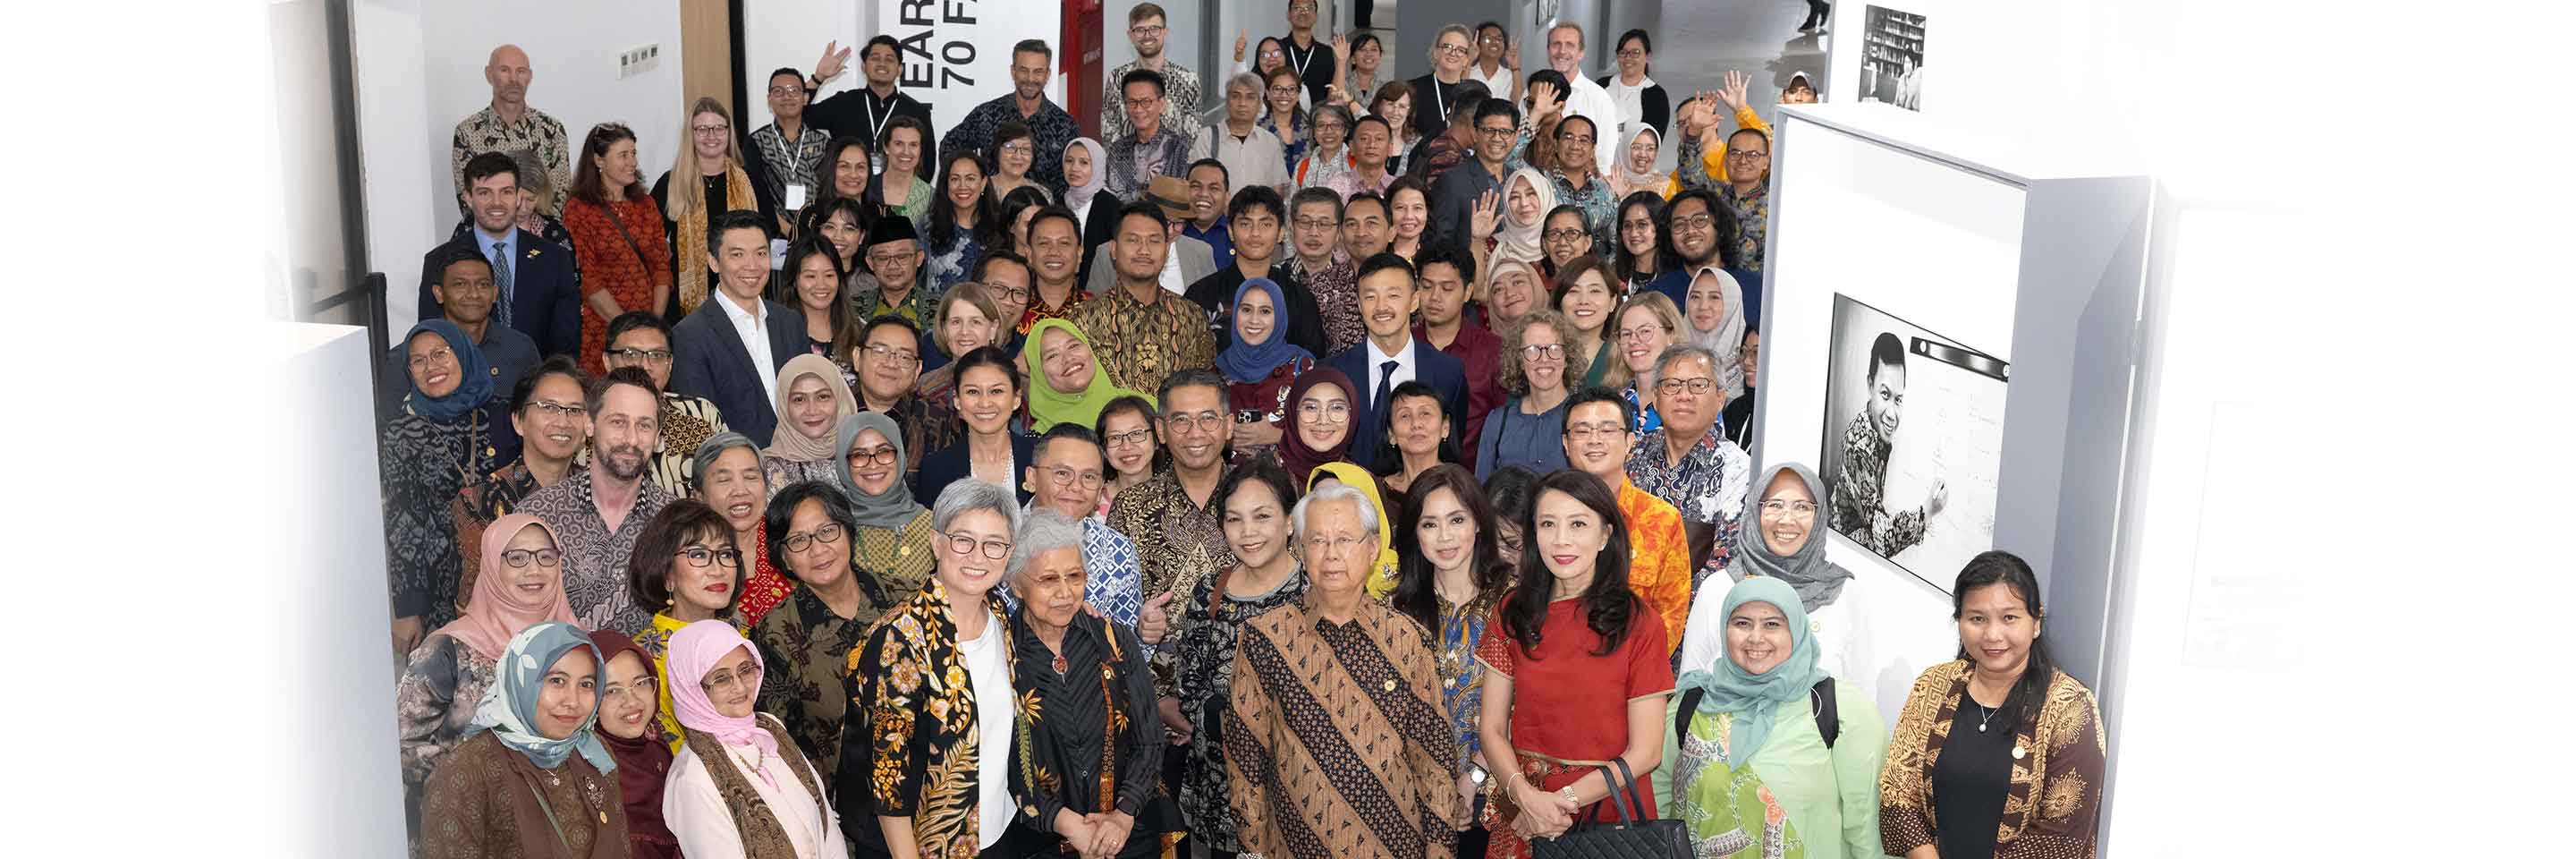 Australian Minister for Foreign Affairs inaugurates the “70 Years, 70 Faces: Australian Alumni in Indonesia” Photo Exhibition. The exhibition showcases more than 70 outstanding alumni from various backgrounds who are making a positive impact in their comm